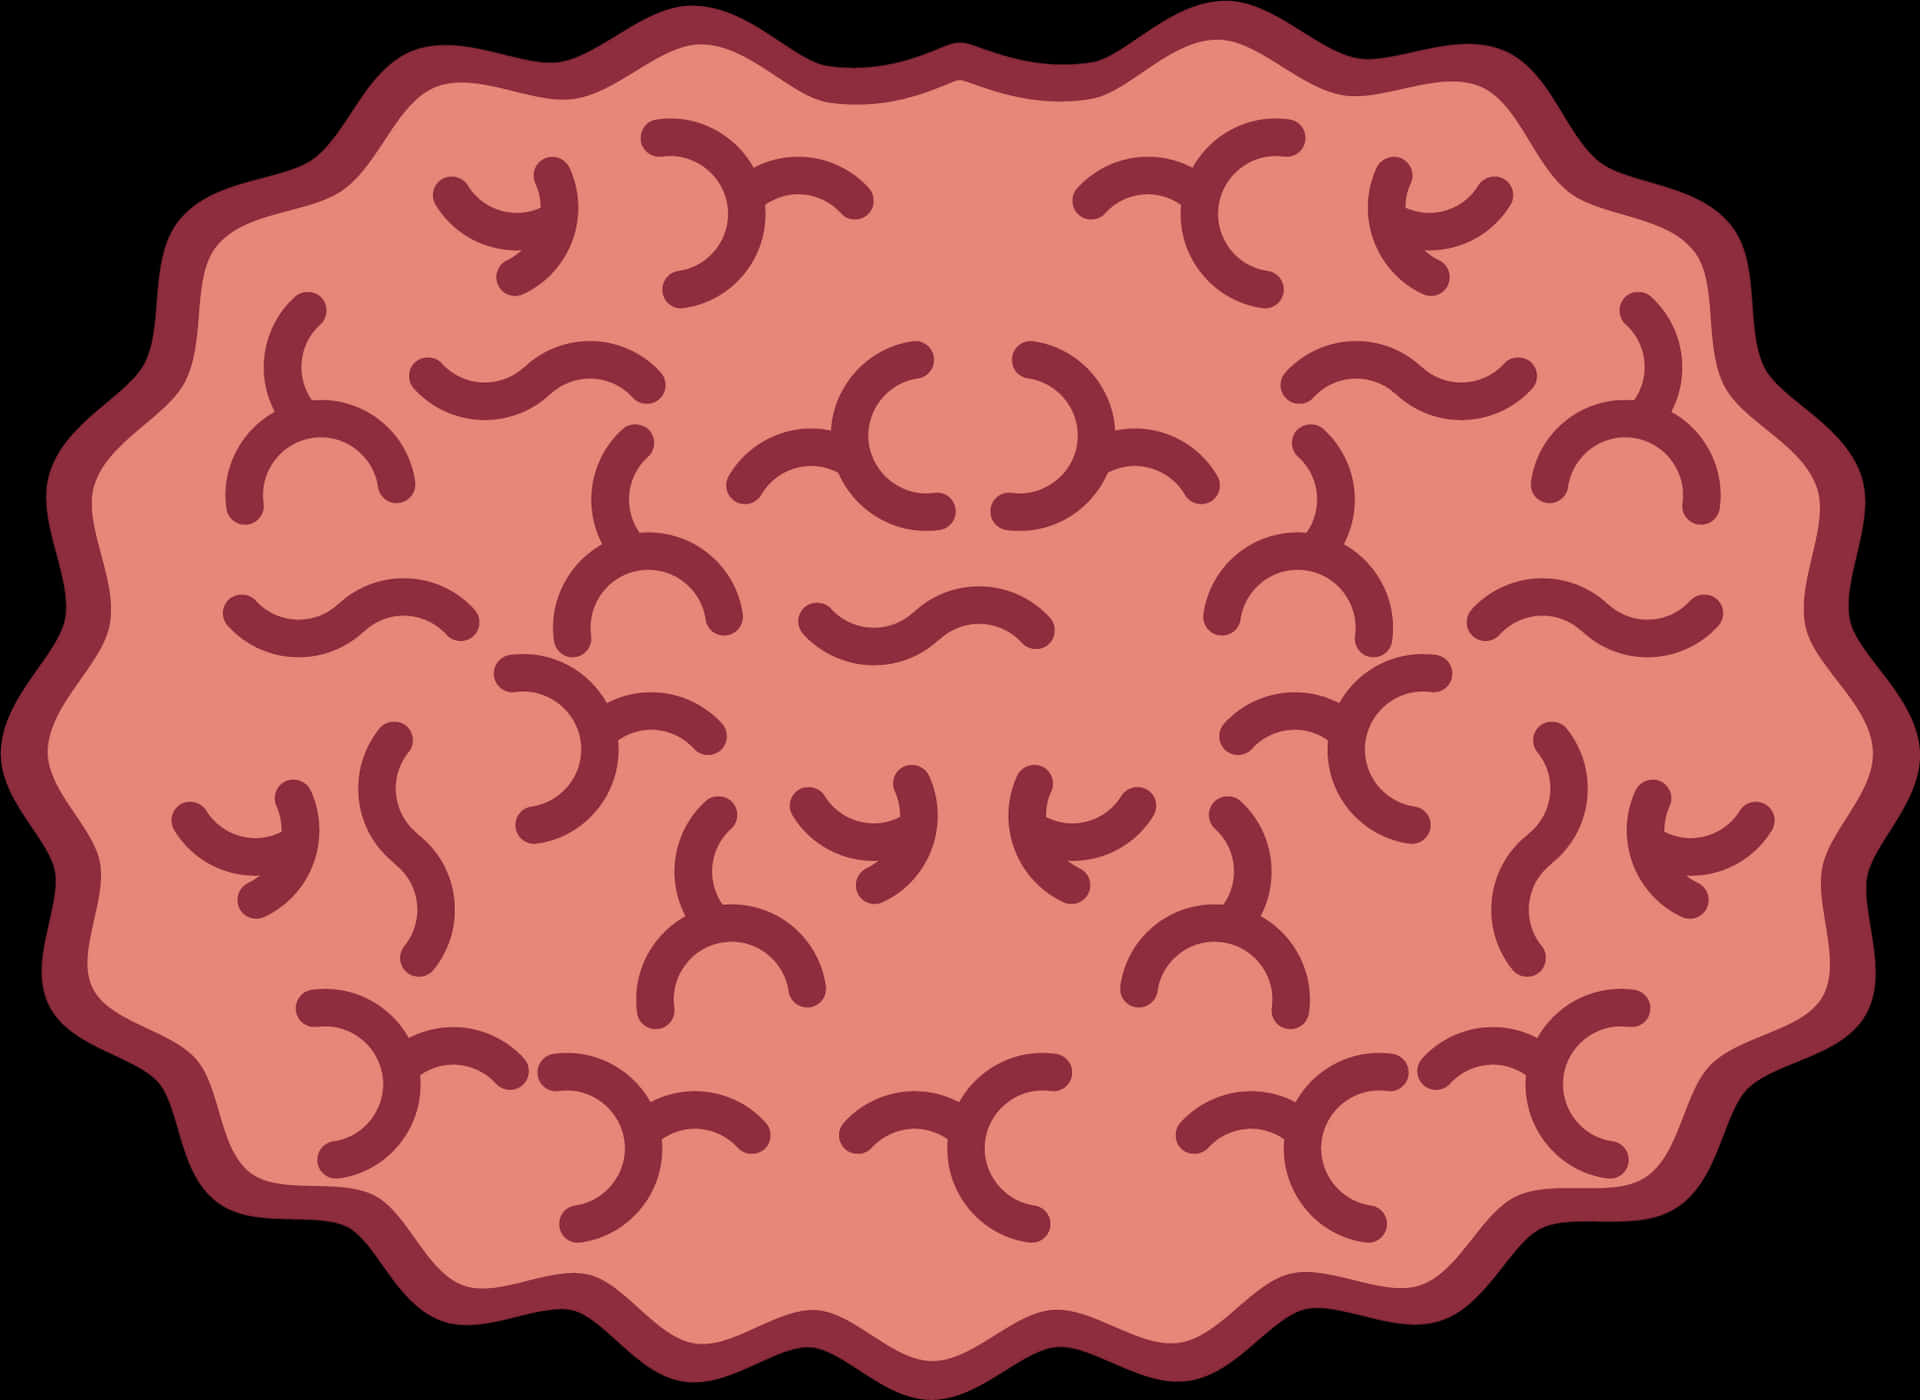 Abstract Brain Pattern Illustration PNG